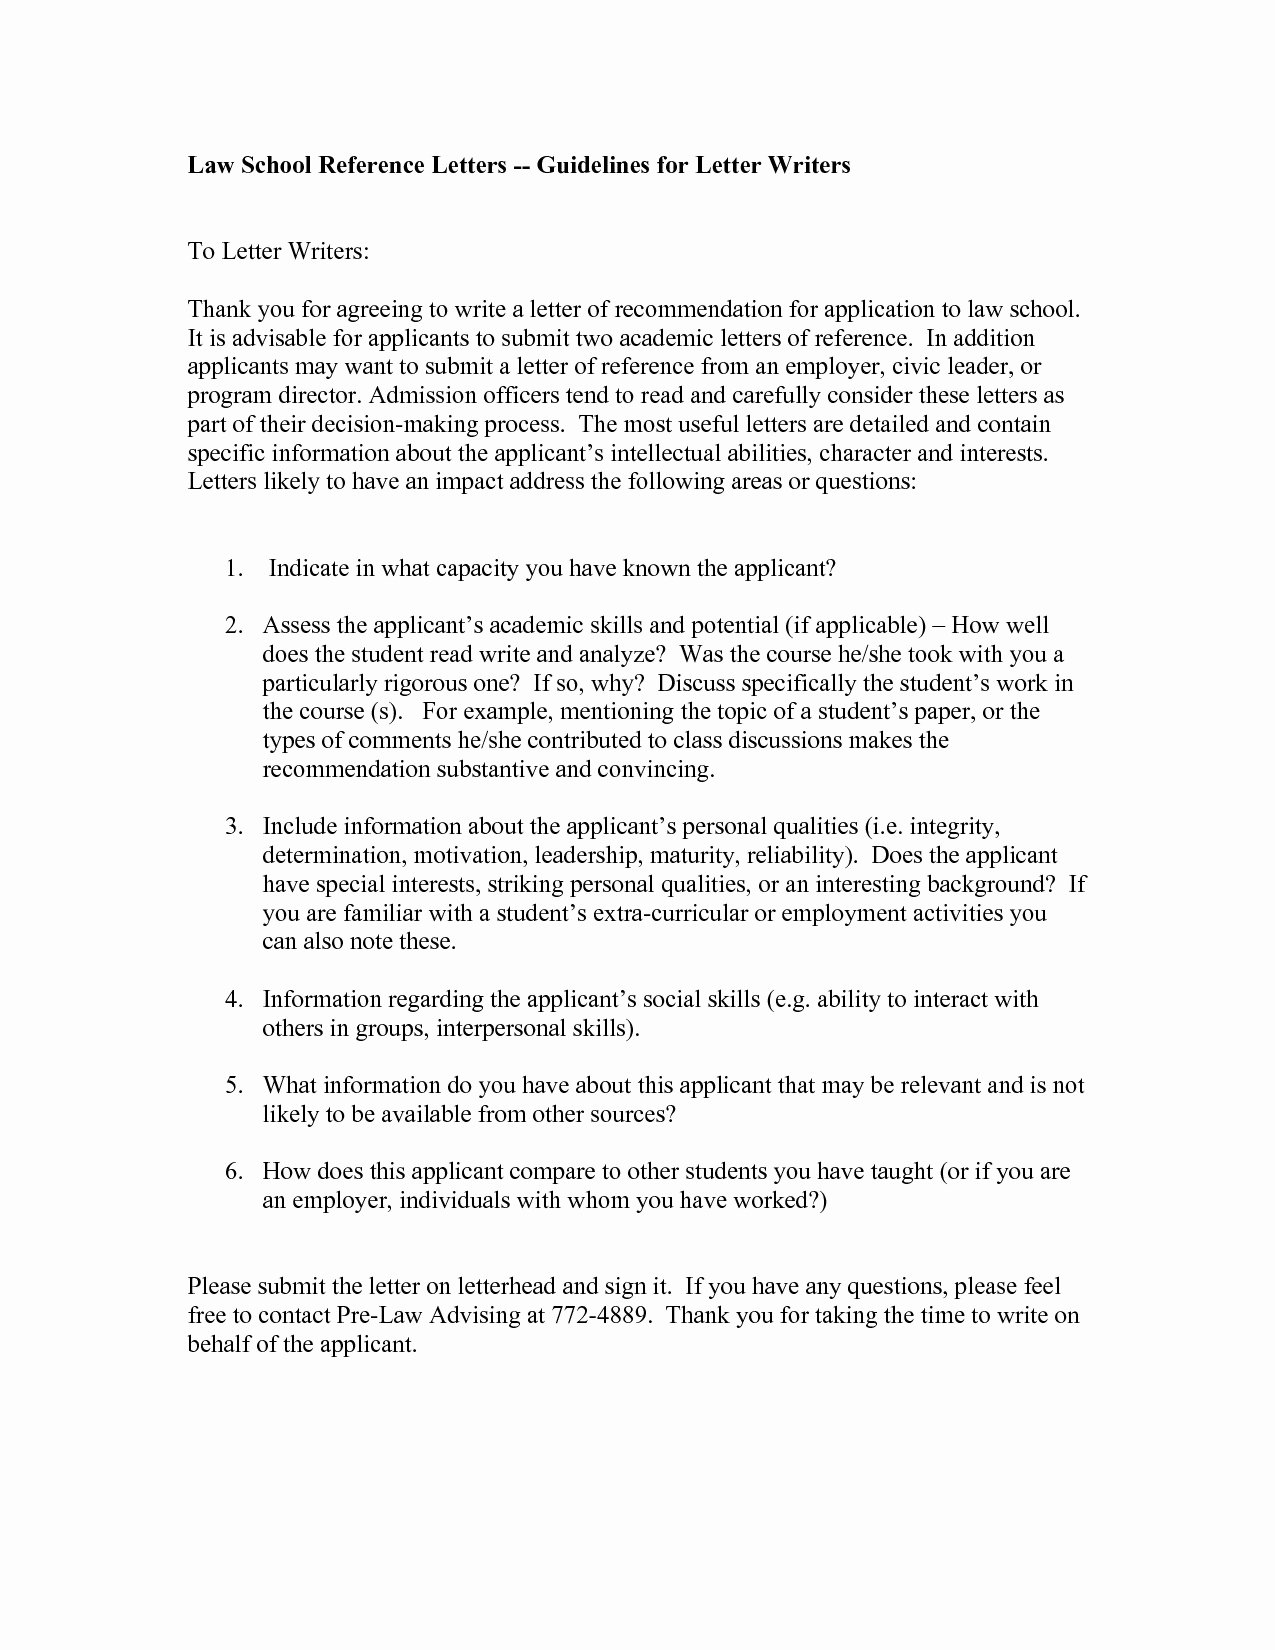 Law School Recommendation Letter Sample Best Of Cover Letter Not Archives Wakisen Valid Cover